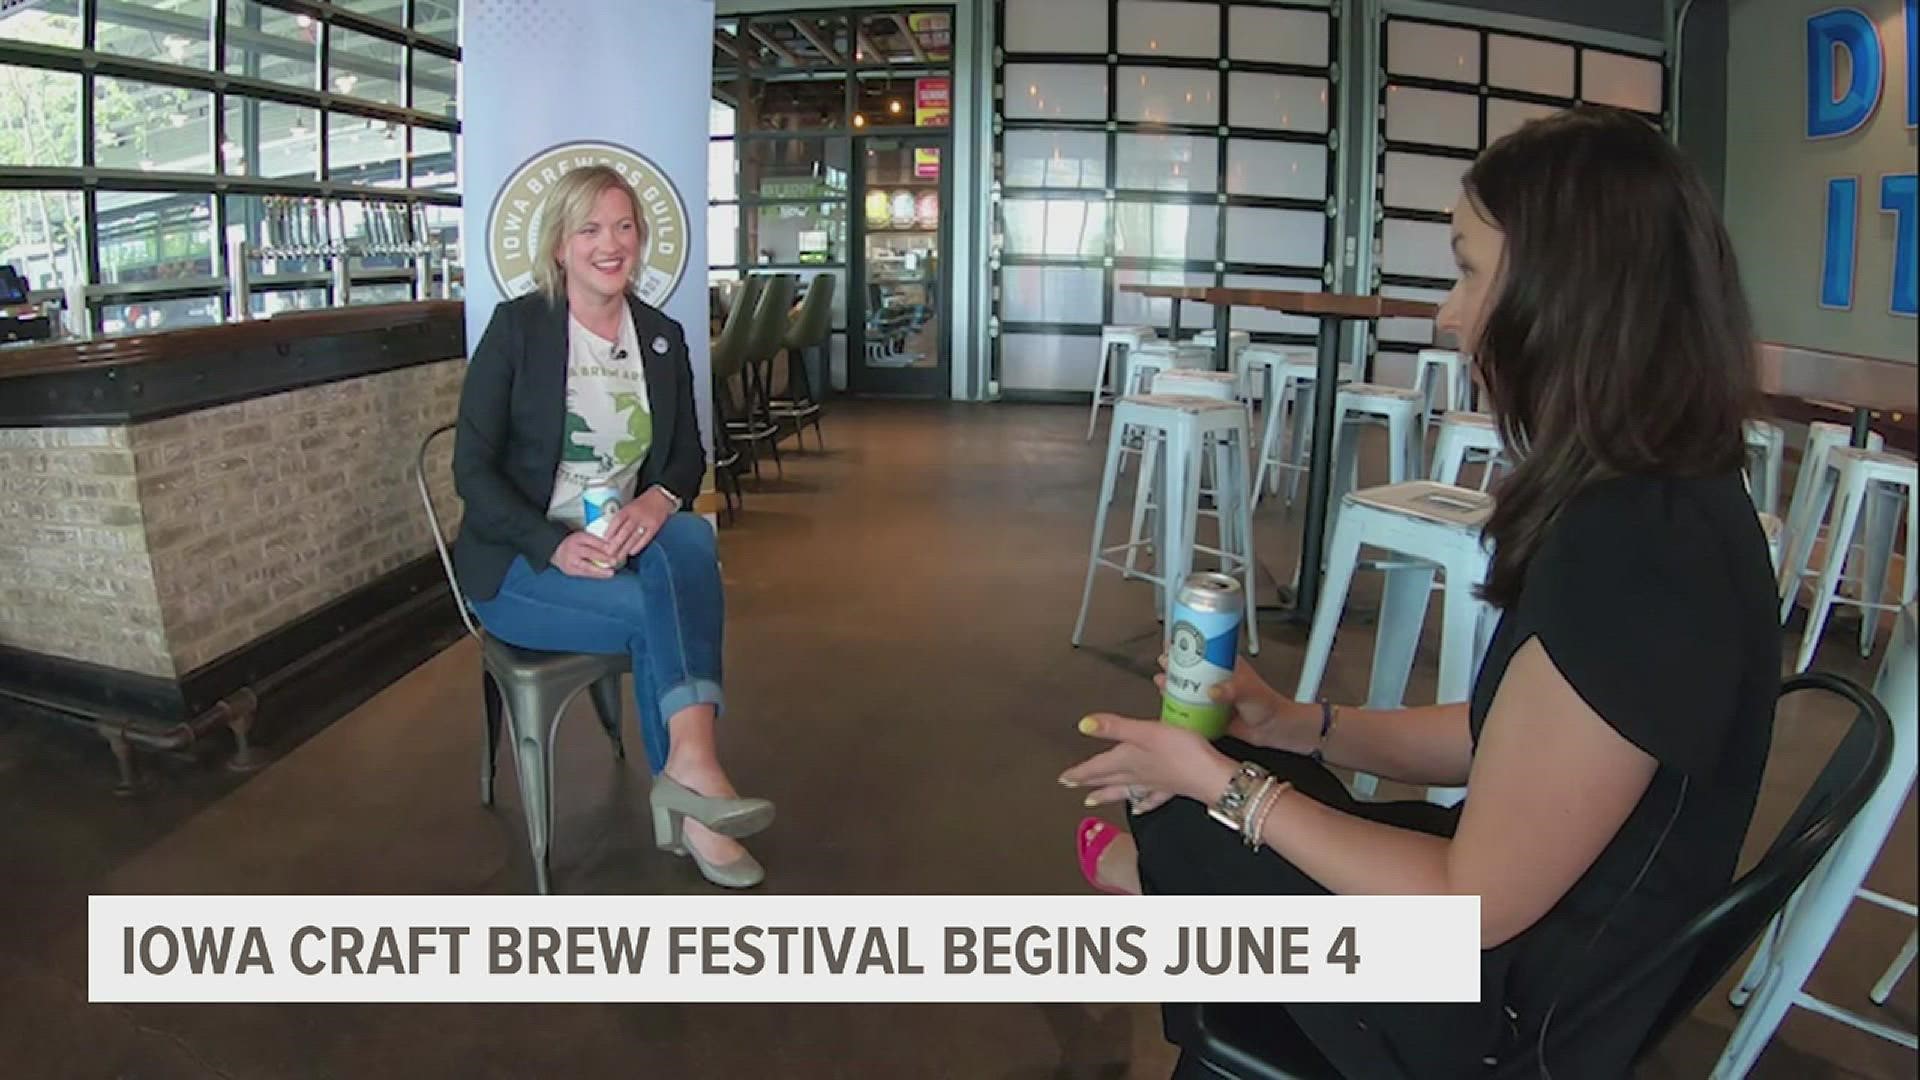 The Iowa Brewers Guild is kicking off the 12th annual Craft Brew Festival on June 4 to kick off Iowa Craft Brew Month.